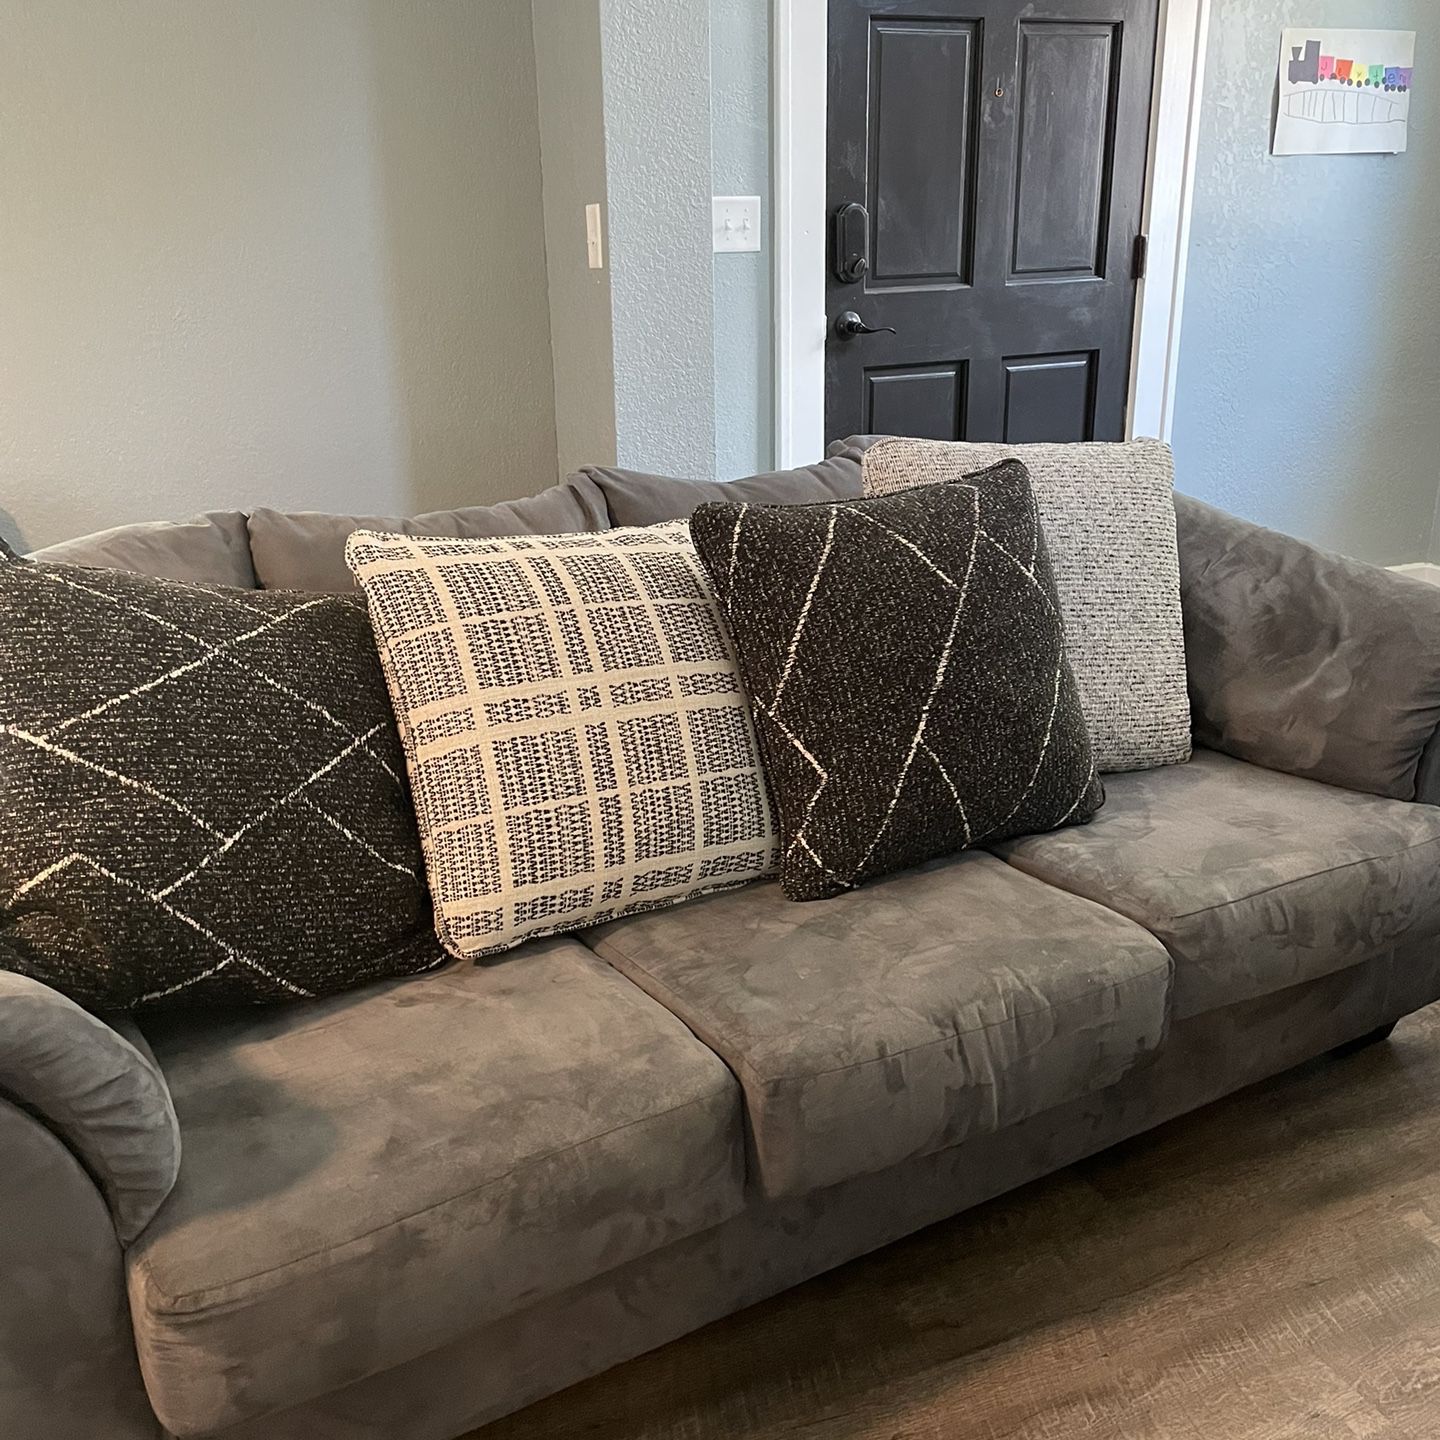 4 Couches For sales - All $2500